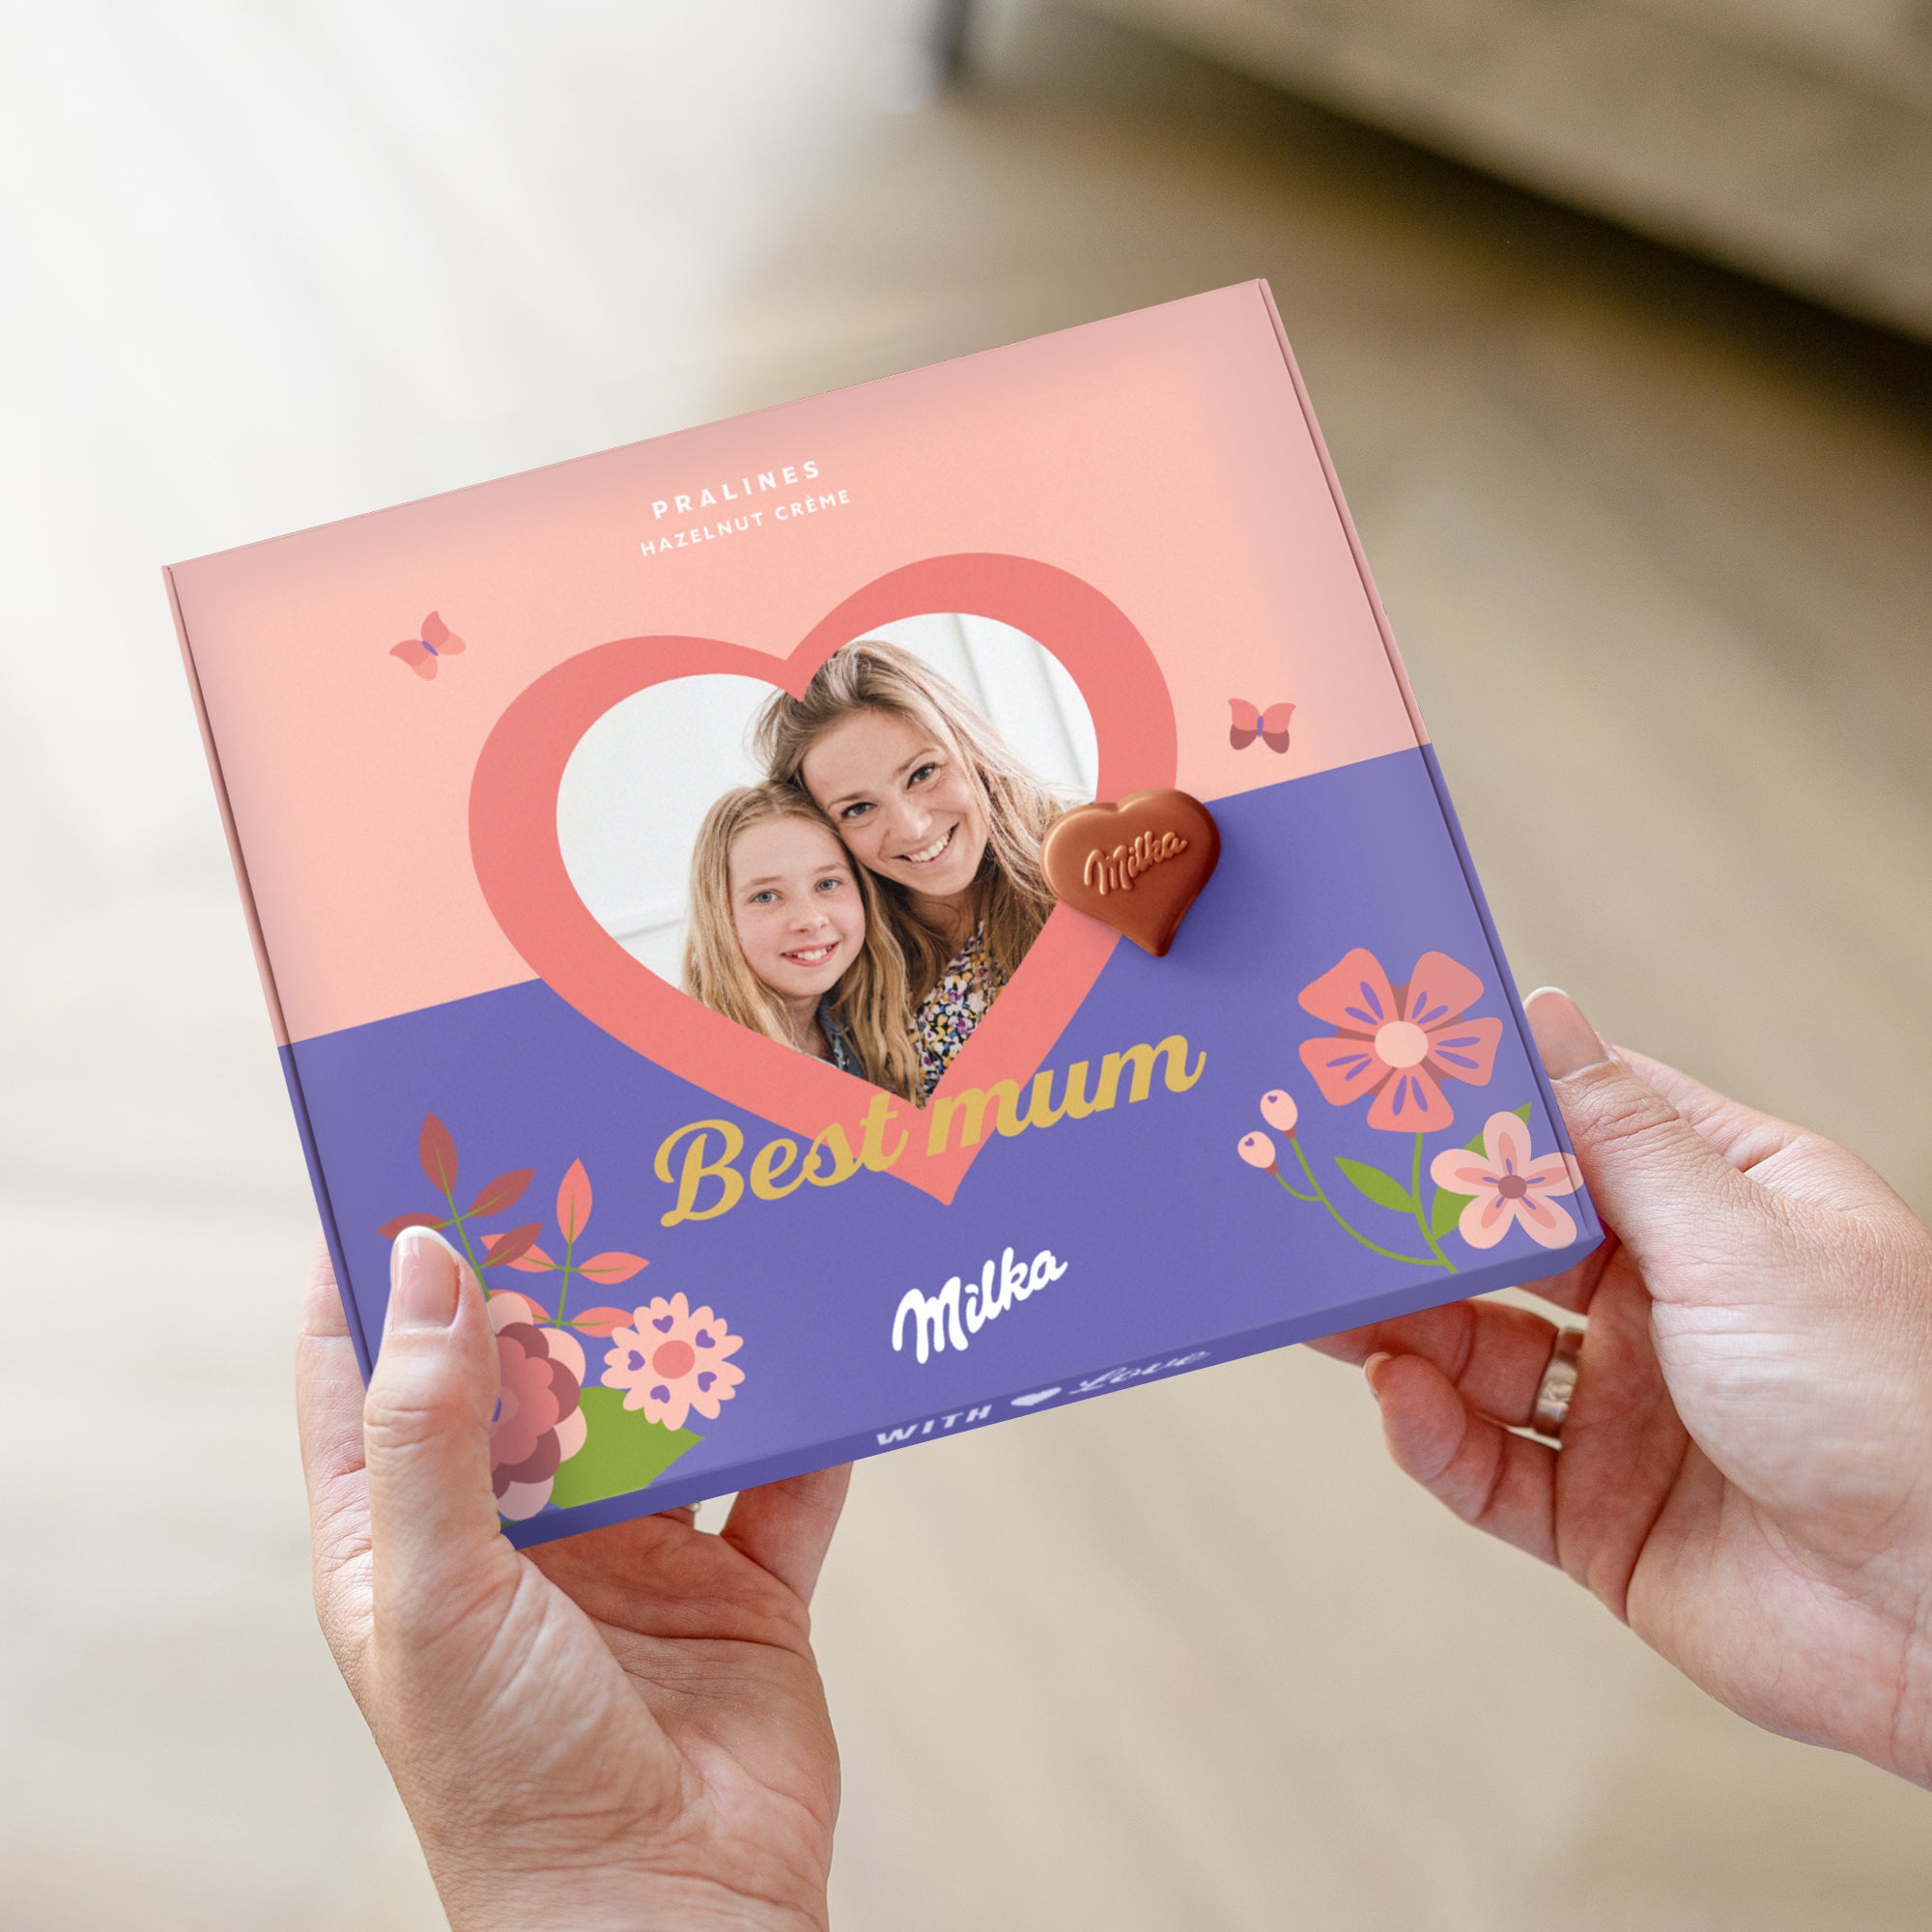 Printed Say it with Milka gift box - Mother's Day - 110 grams